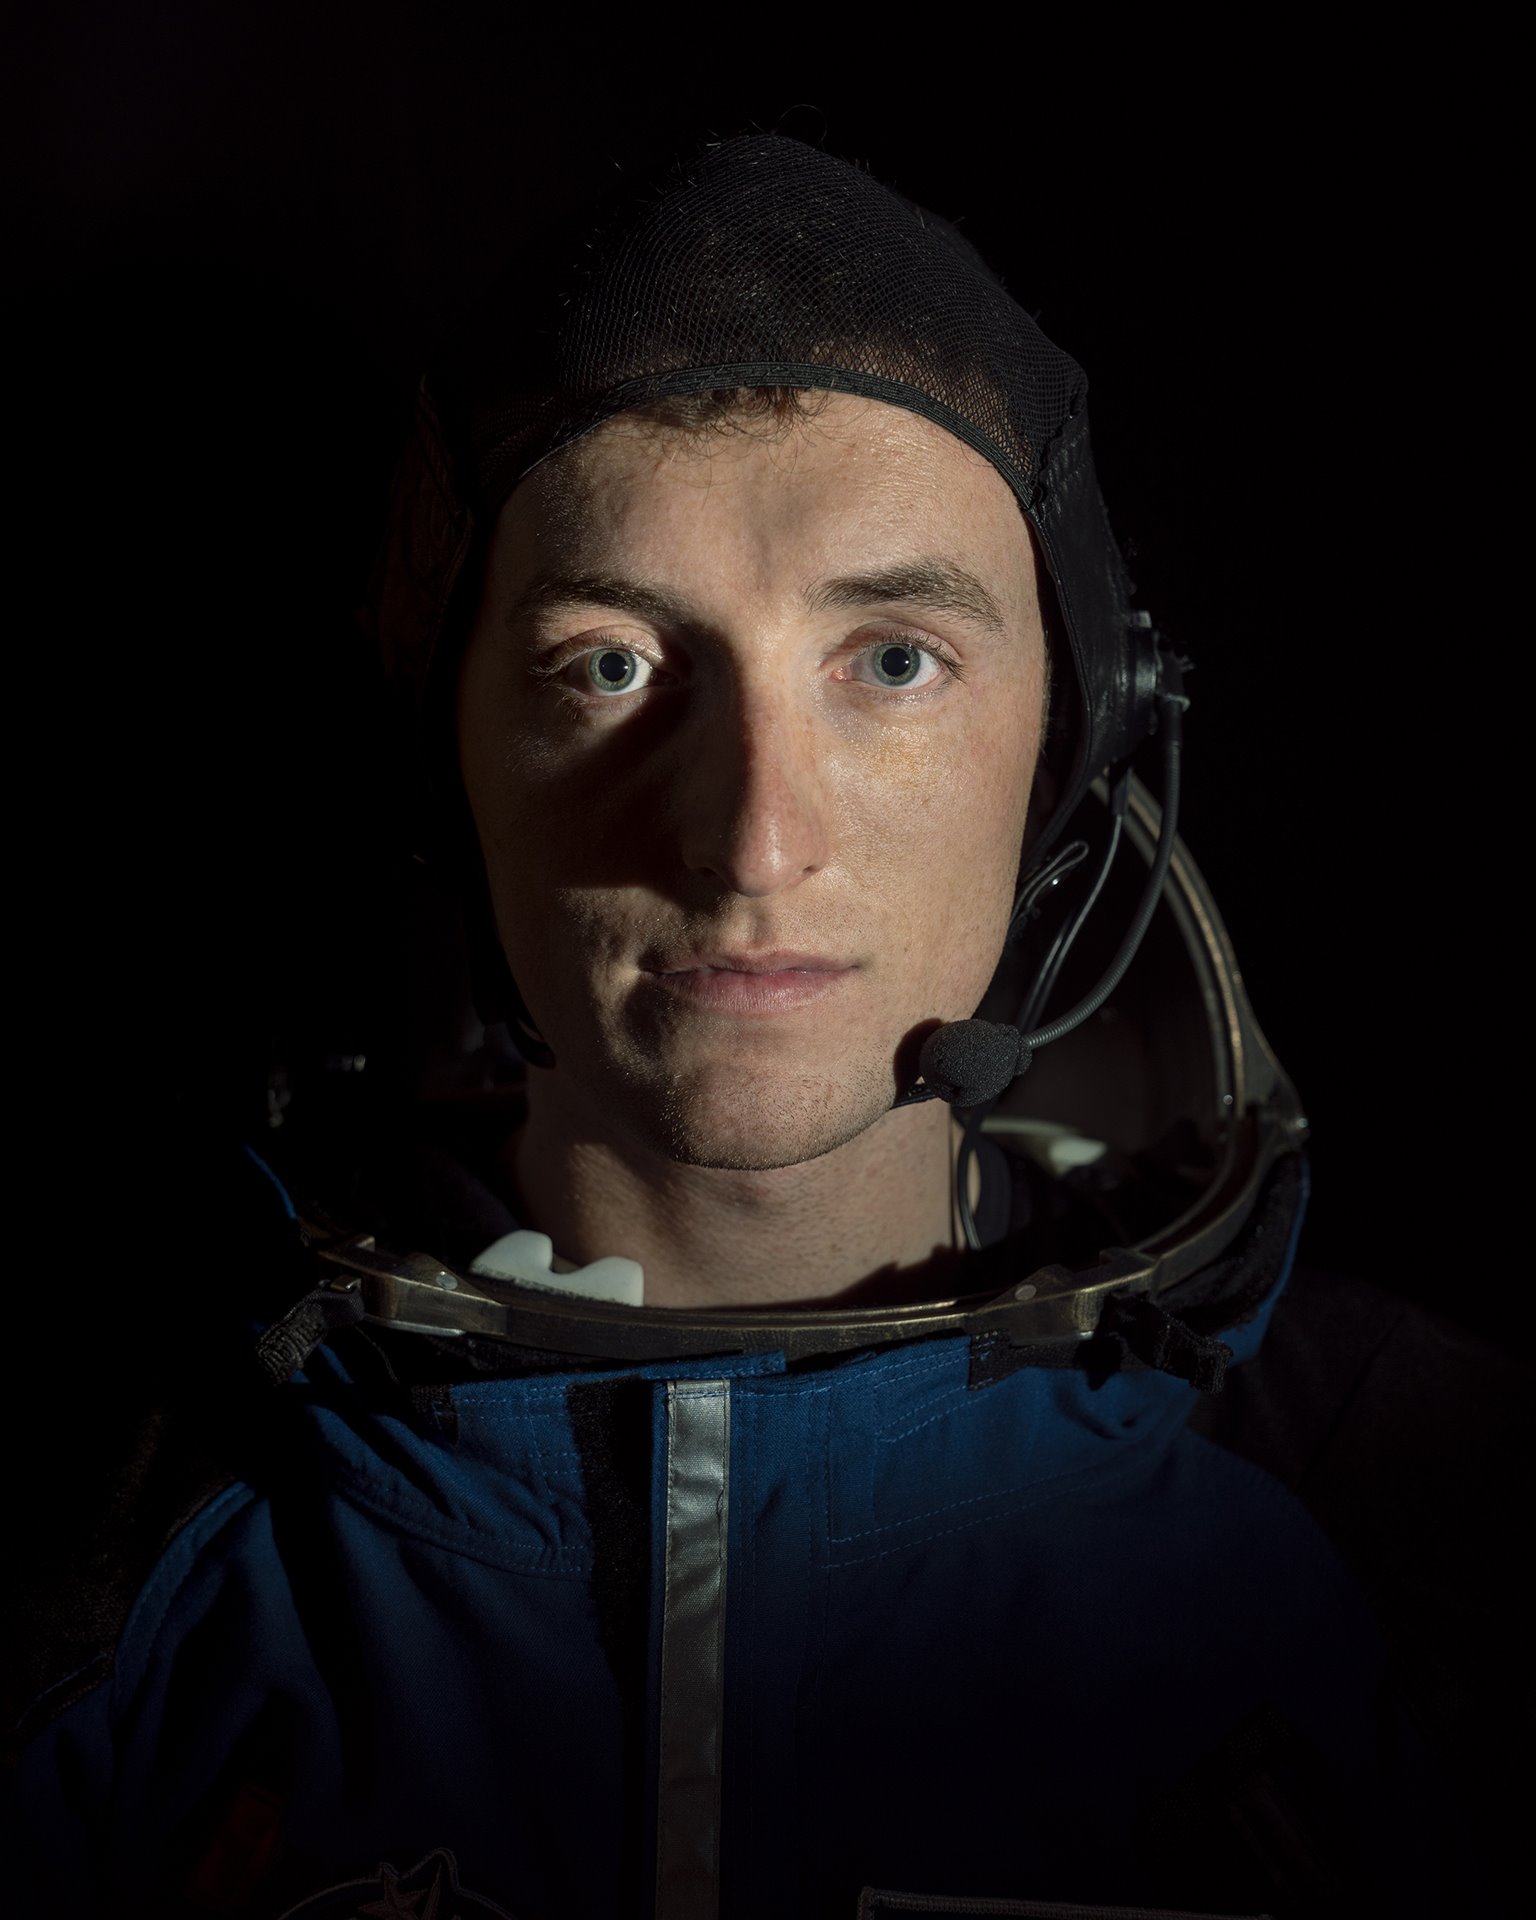 Brian Murphy, an astronaut for the fictional Gay Space Agency, poses for a portrait after donning a space suit for the first time in Melbourne, Florida, United States. Murphy is a real-life LGBTQI+ aspiring astronaut participating in civilian astronaut training with the nonprofit, Out Astronaut.